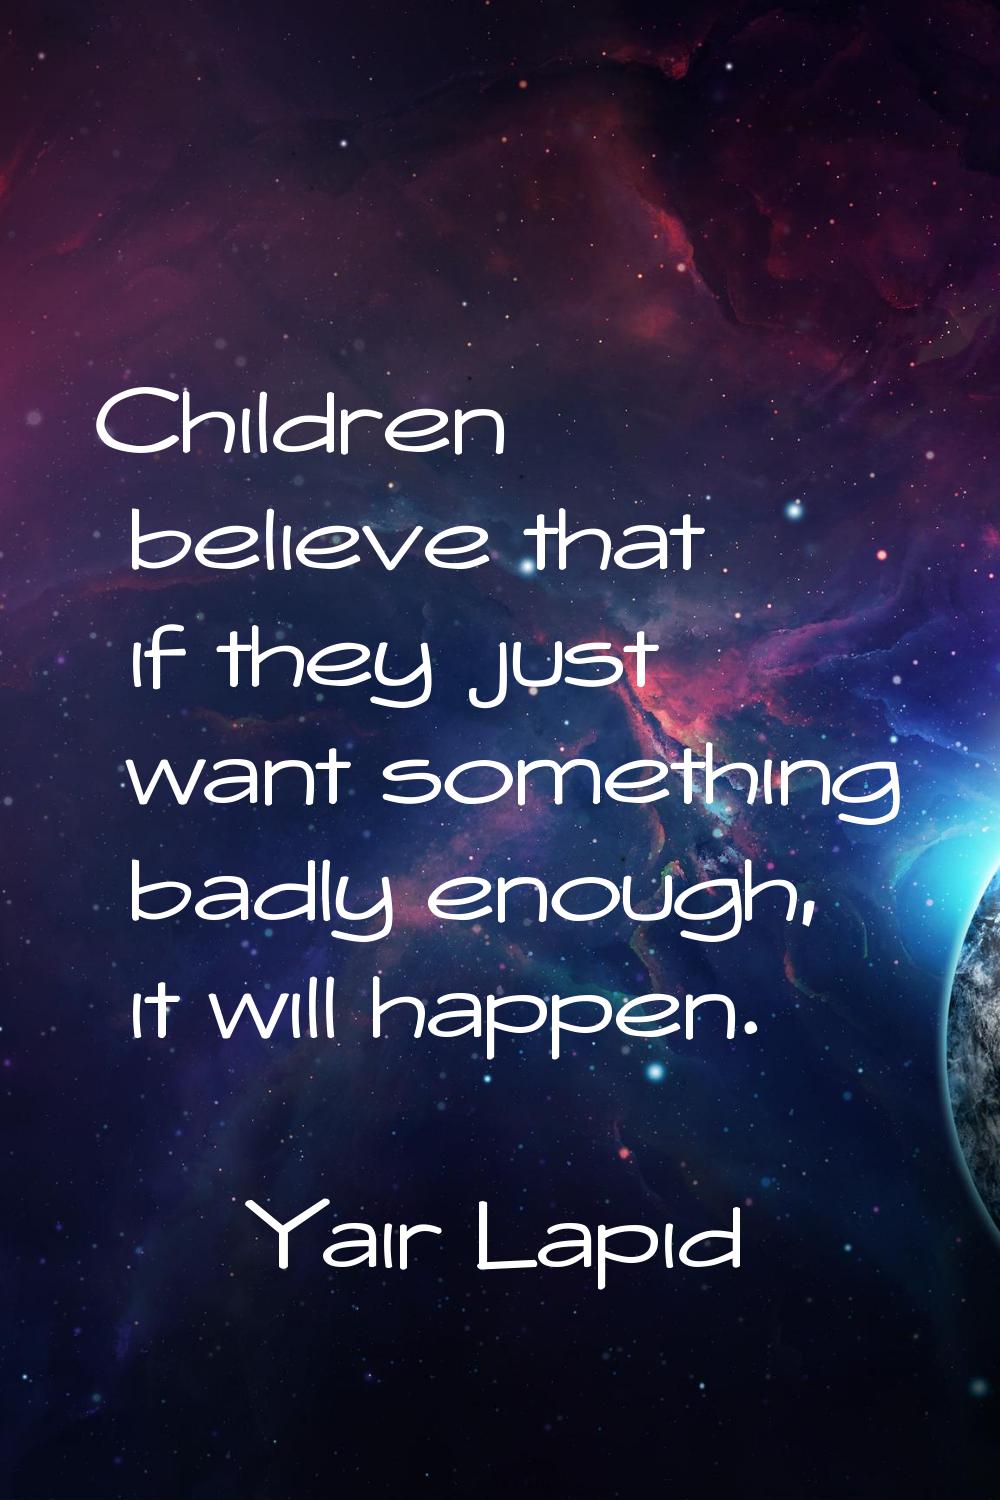 Children believe that if they just want something badly enough, it will happen.